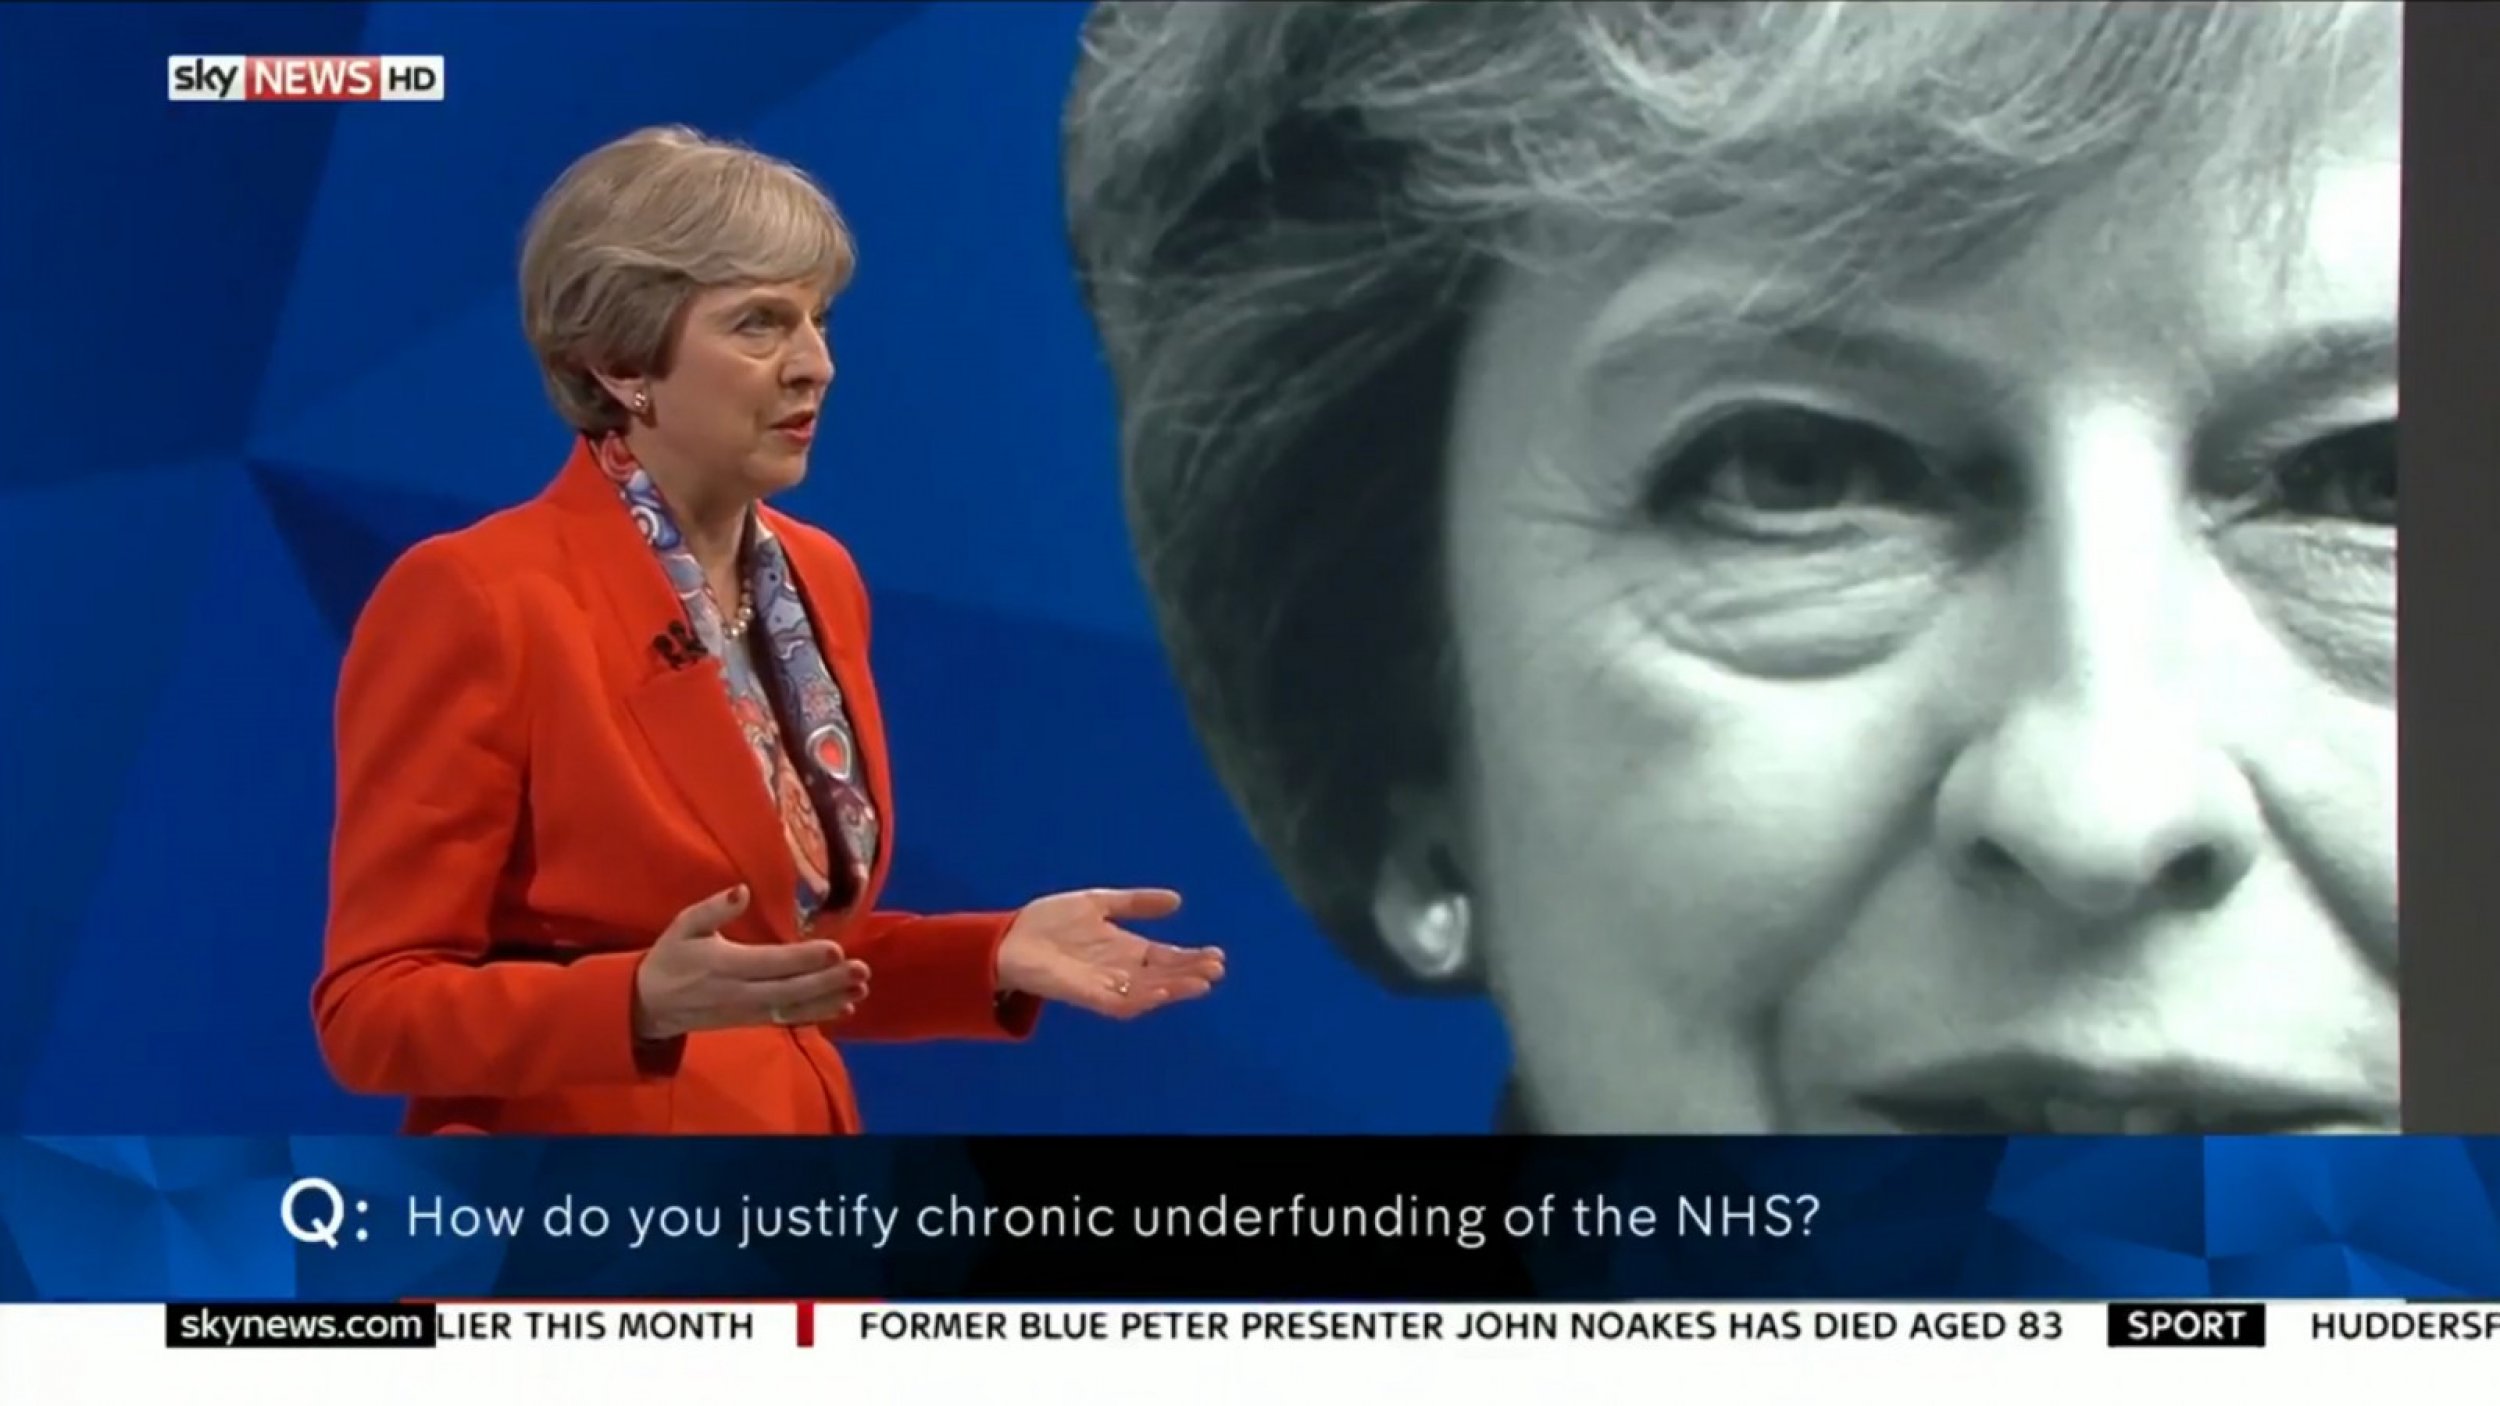 Man Mouths Obscenities at Theresa May During Skys Battle For Number 10